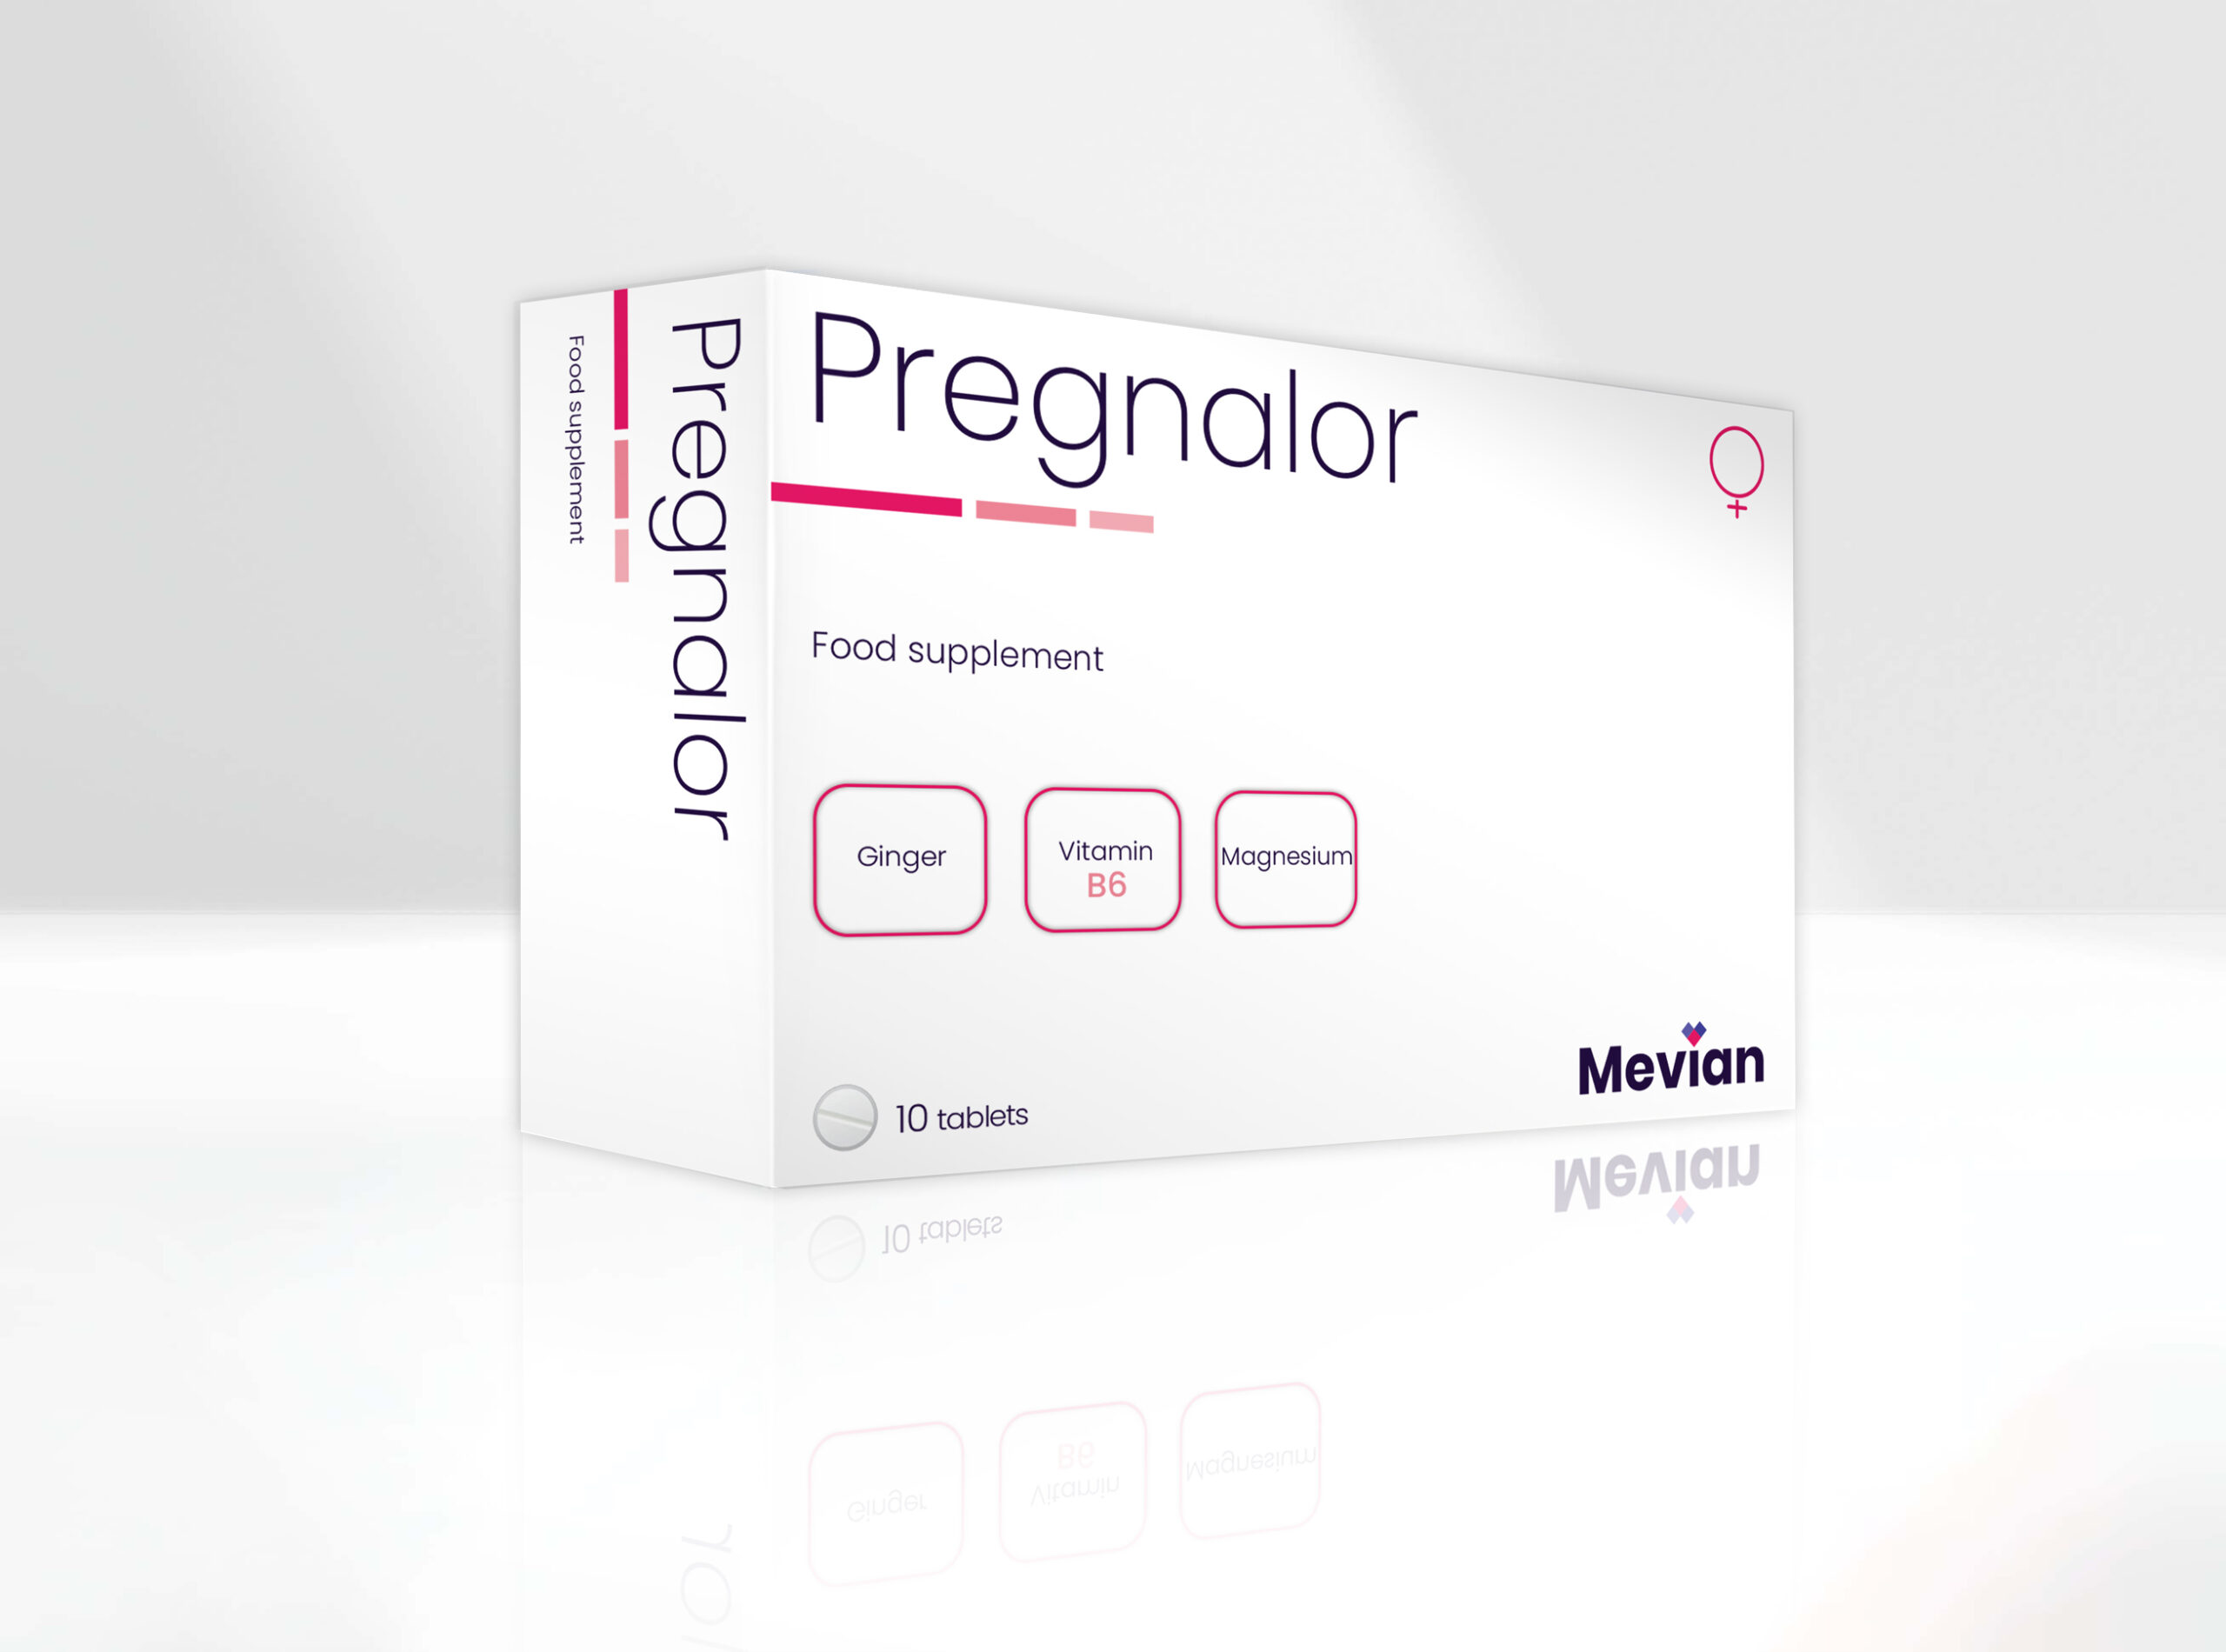 Pregnalor is a safe and well-tolerated nutritional supplement for women who suffer from morning sickness or nausea during pregnancy.